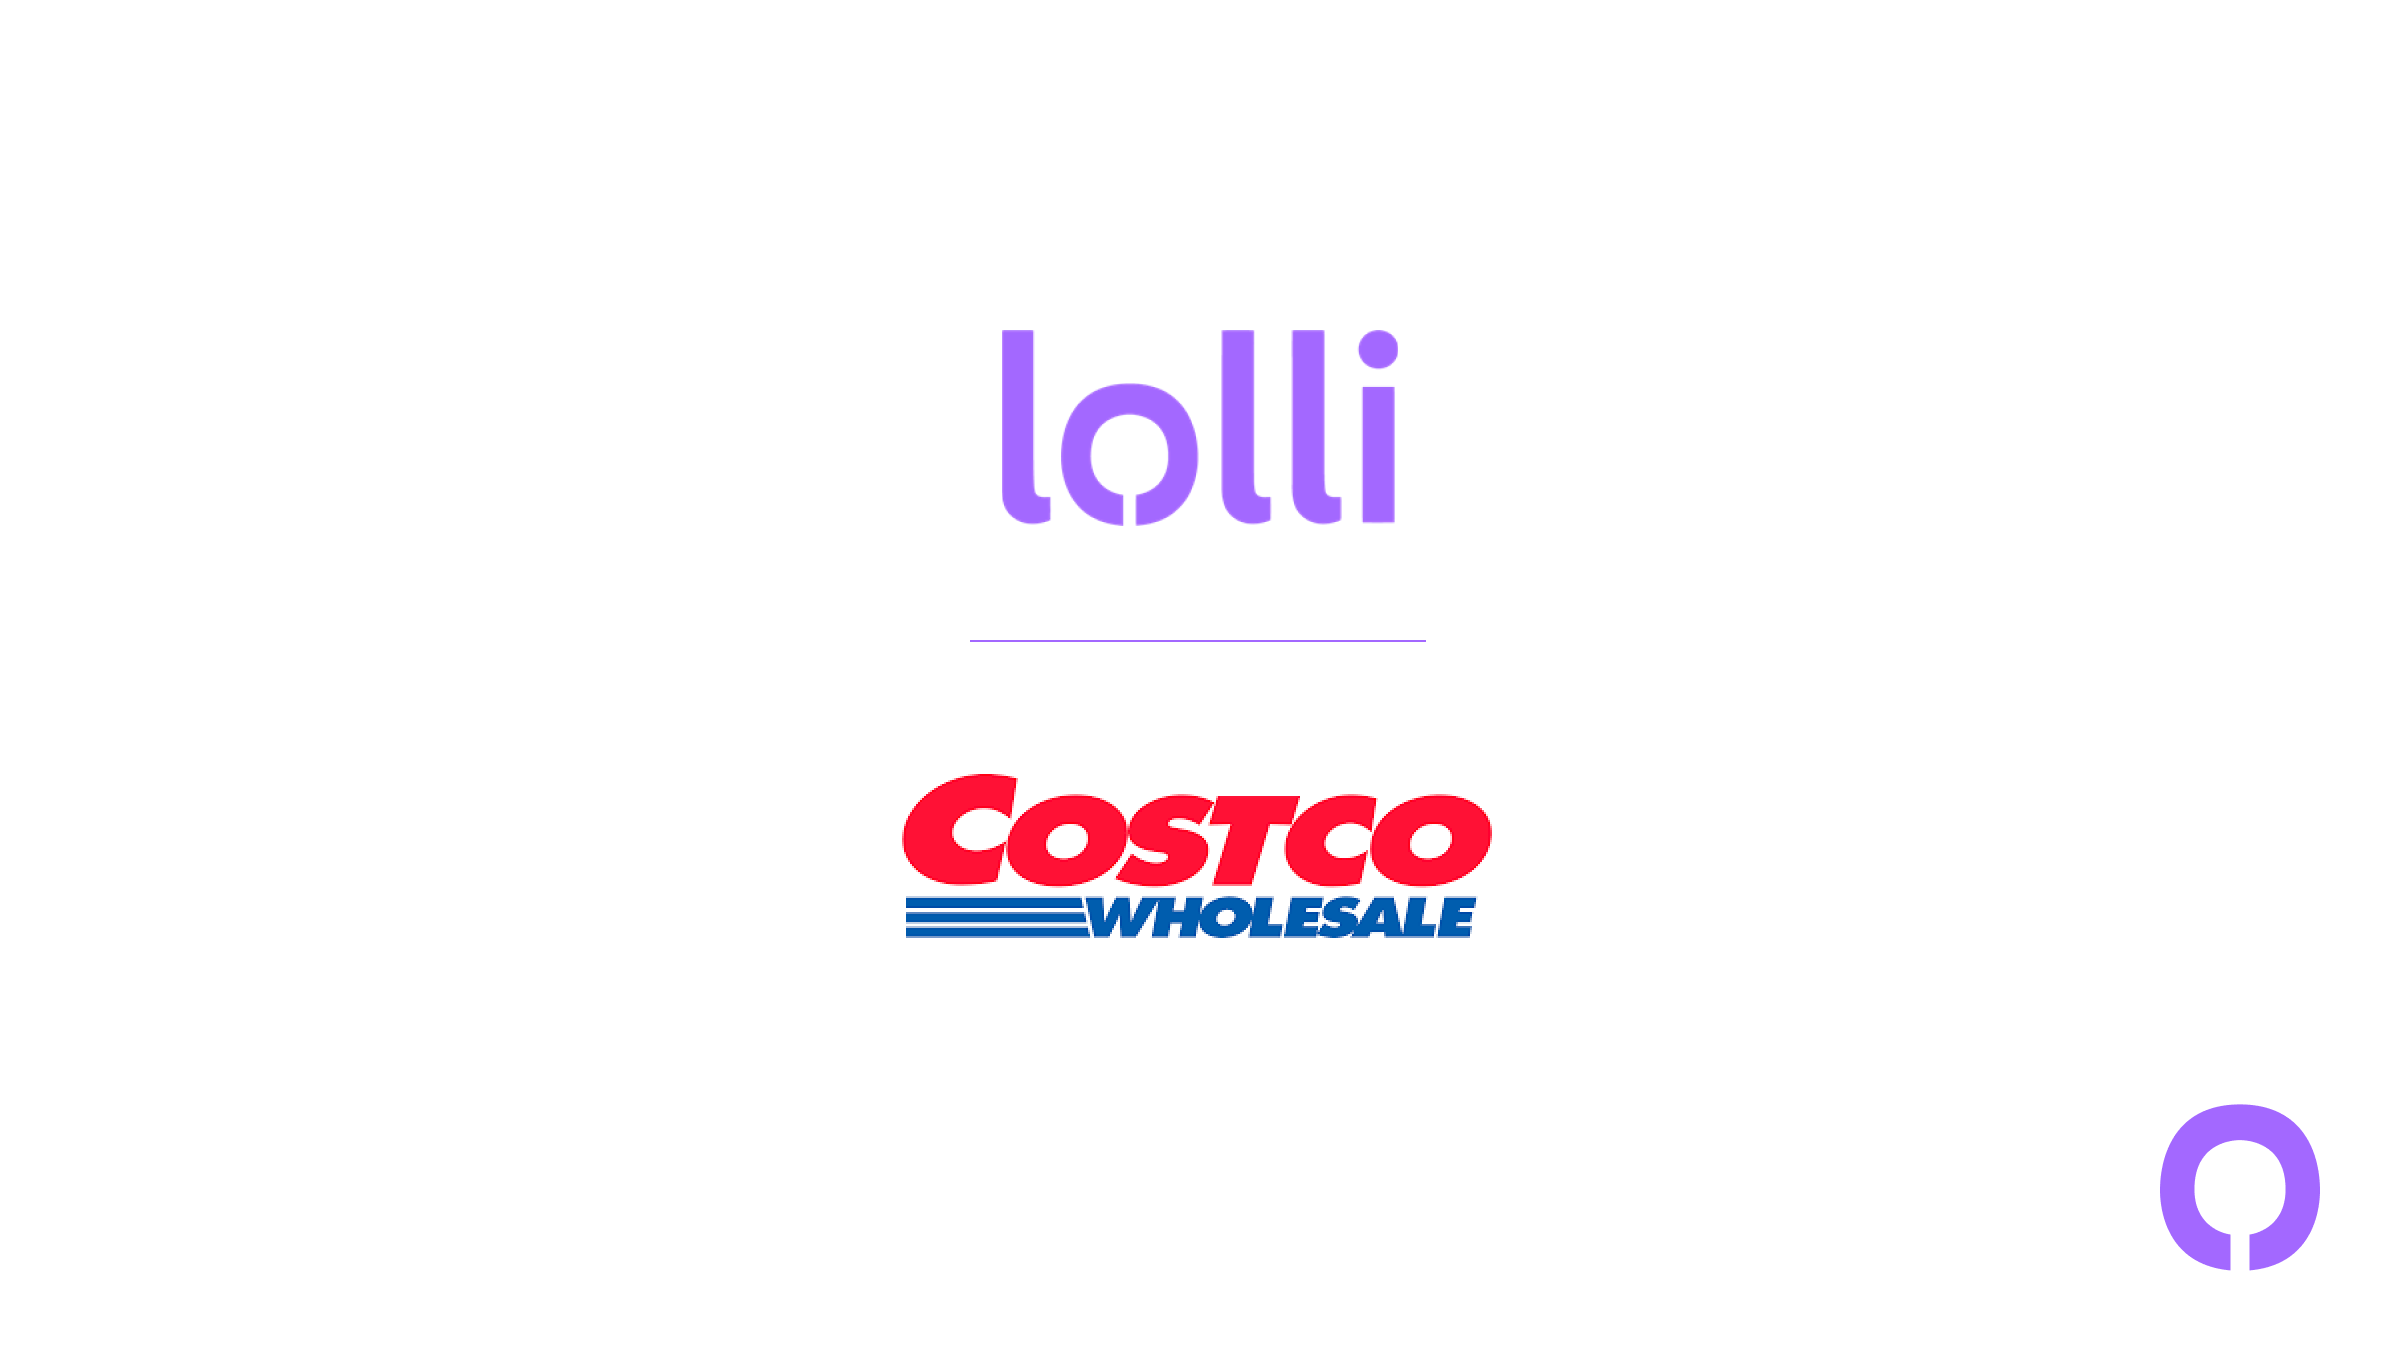 BREAKING: COSTCO IS NOW LIVE ON LOLLI!